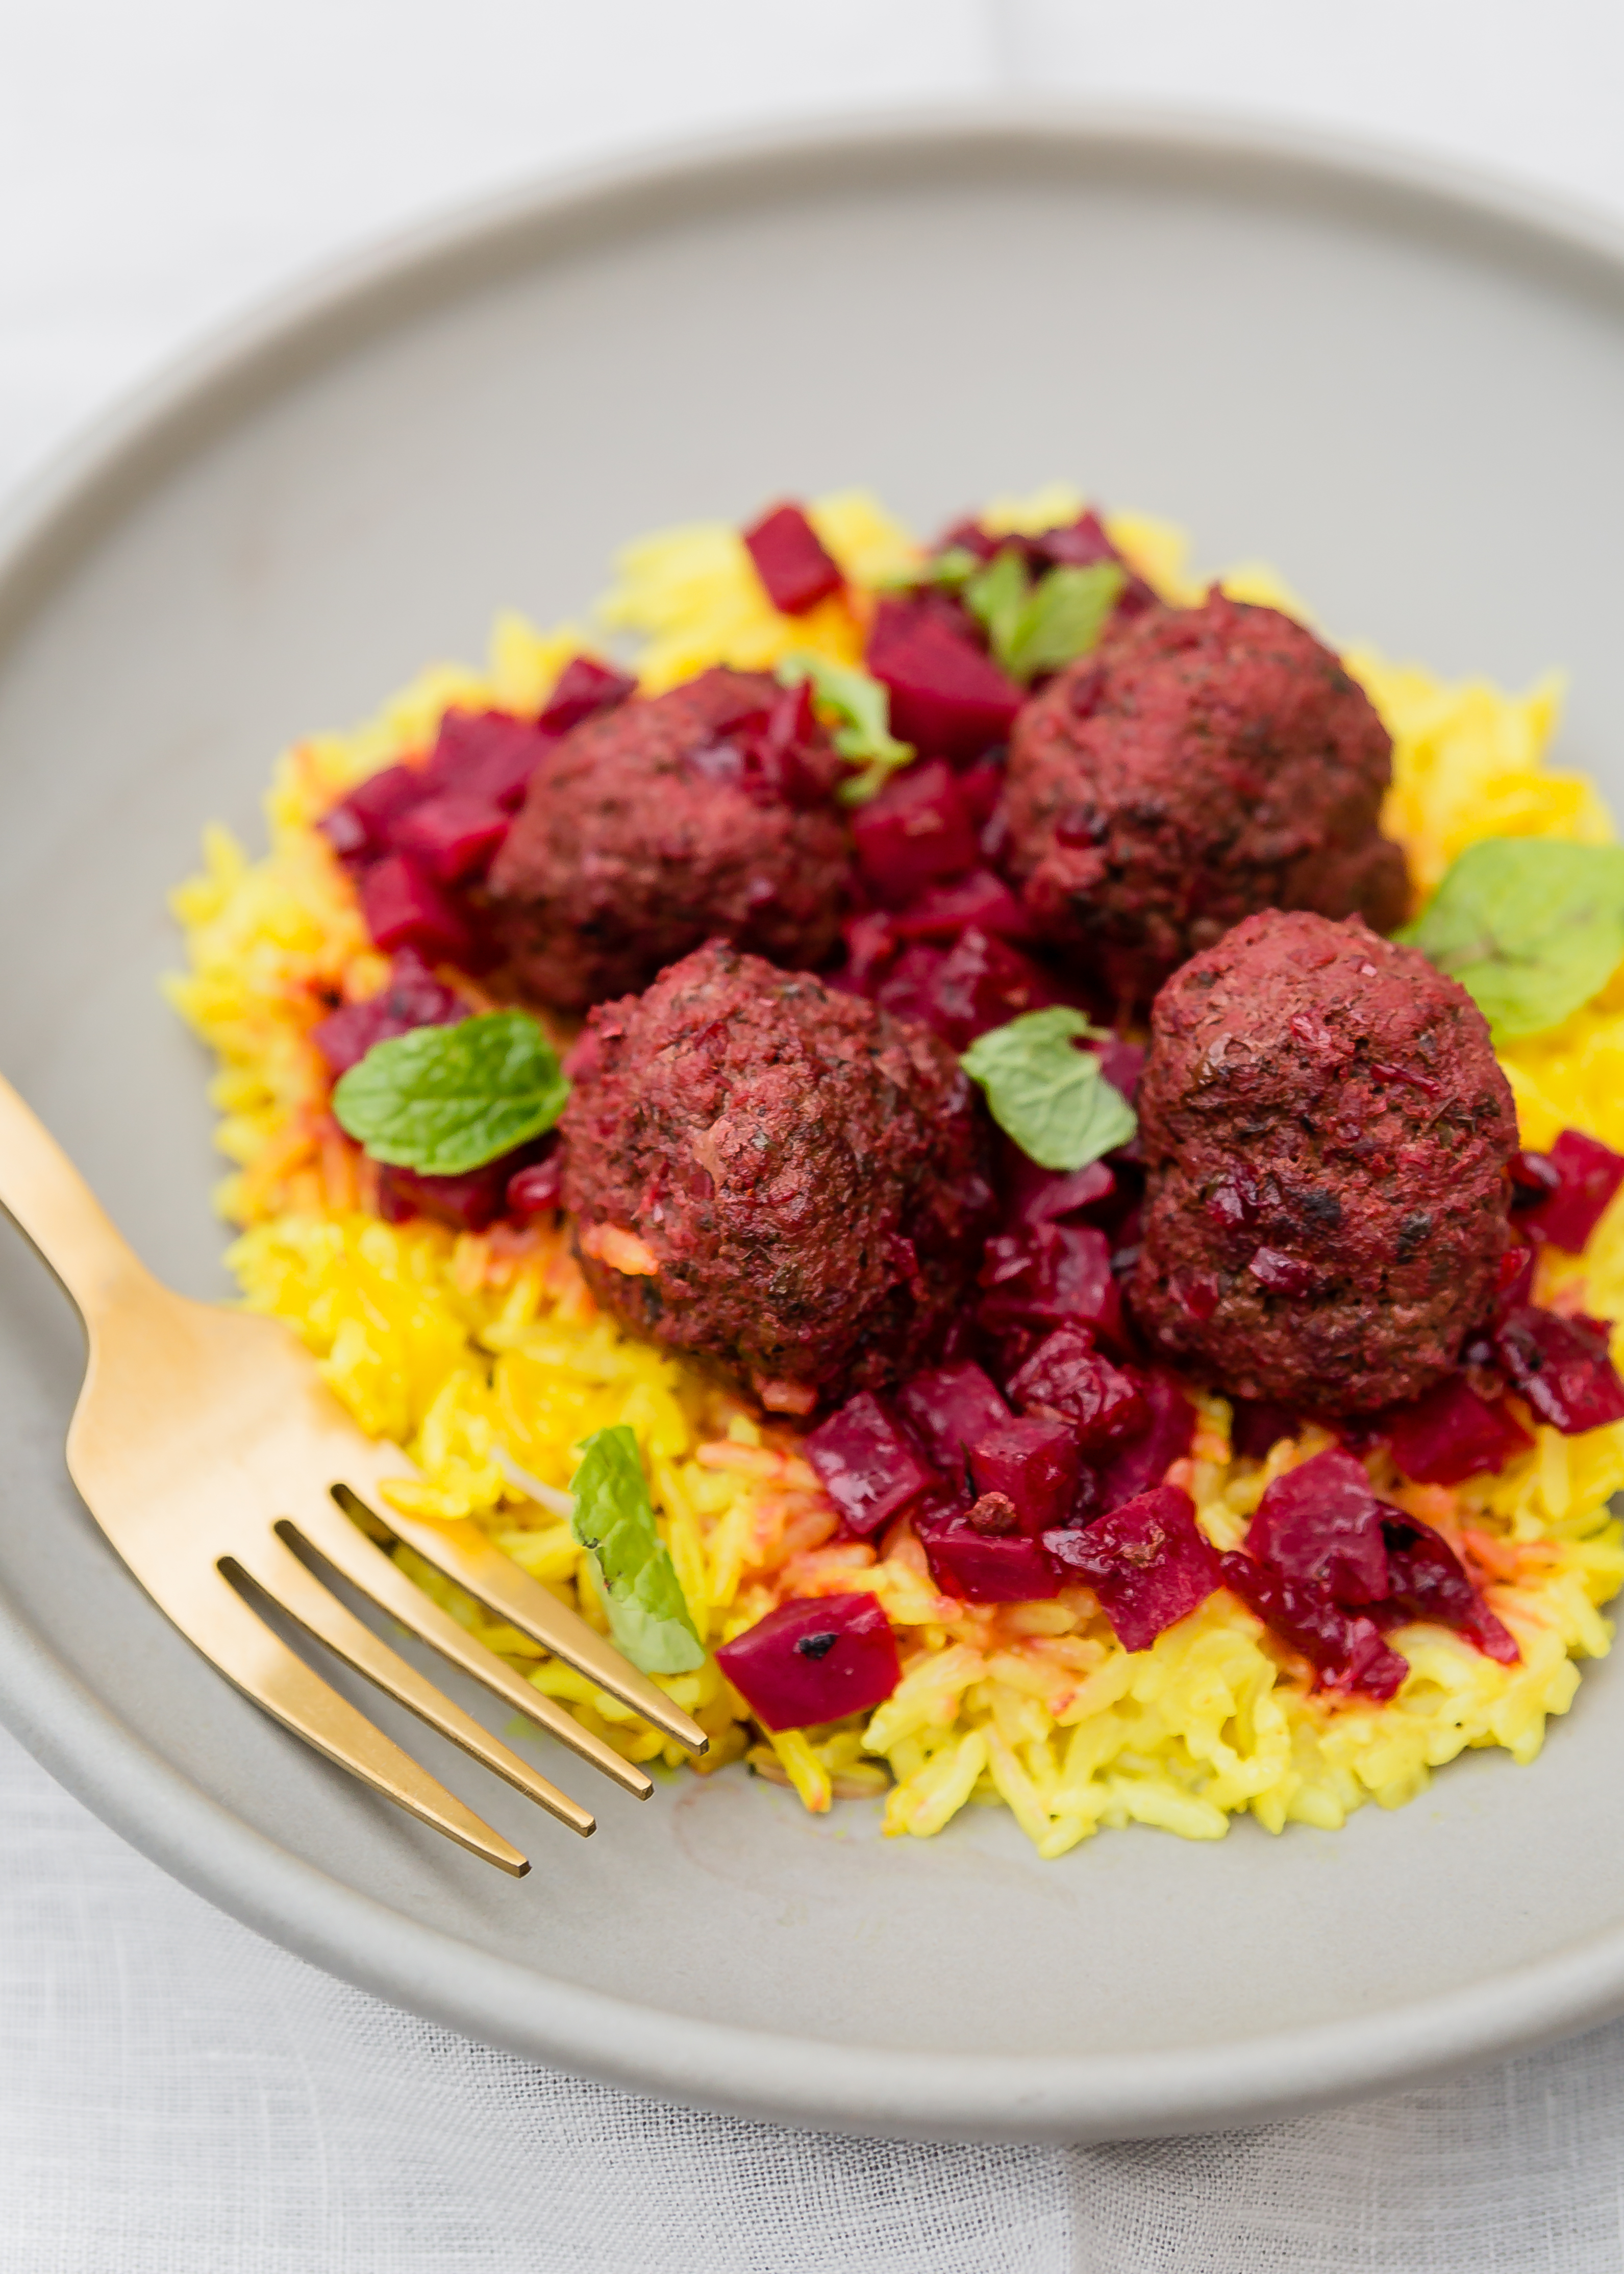 The Persian meatballs with beets from Israeli Soul cookbook wasn't my favorite dish from the book, but it is certainly eye-catching and would make quite an impression.